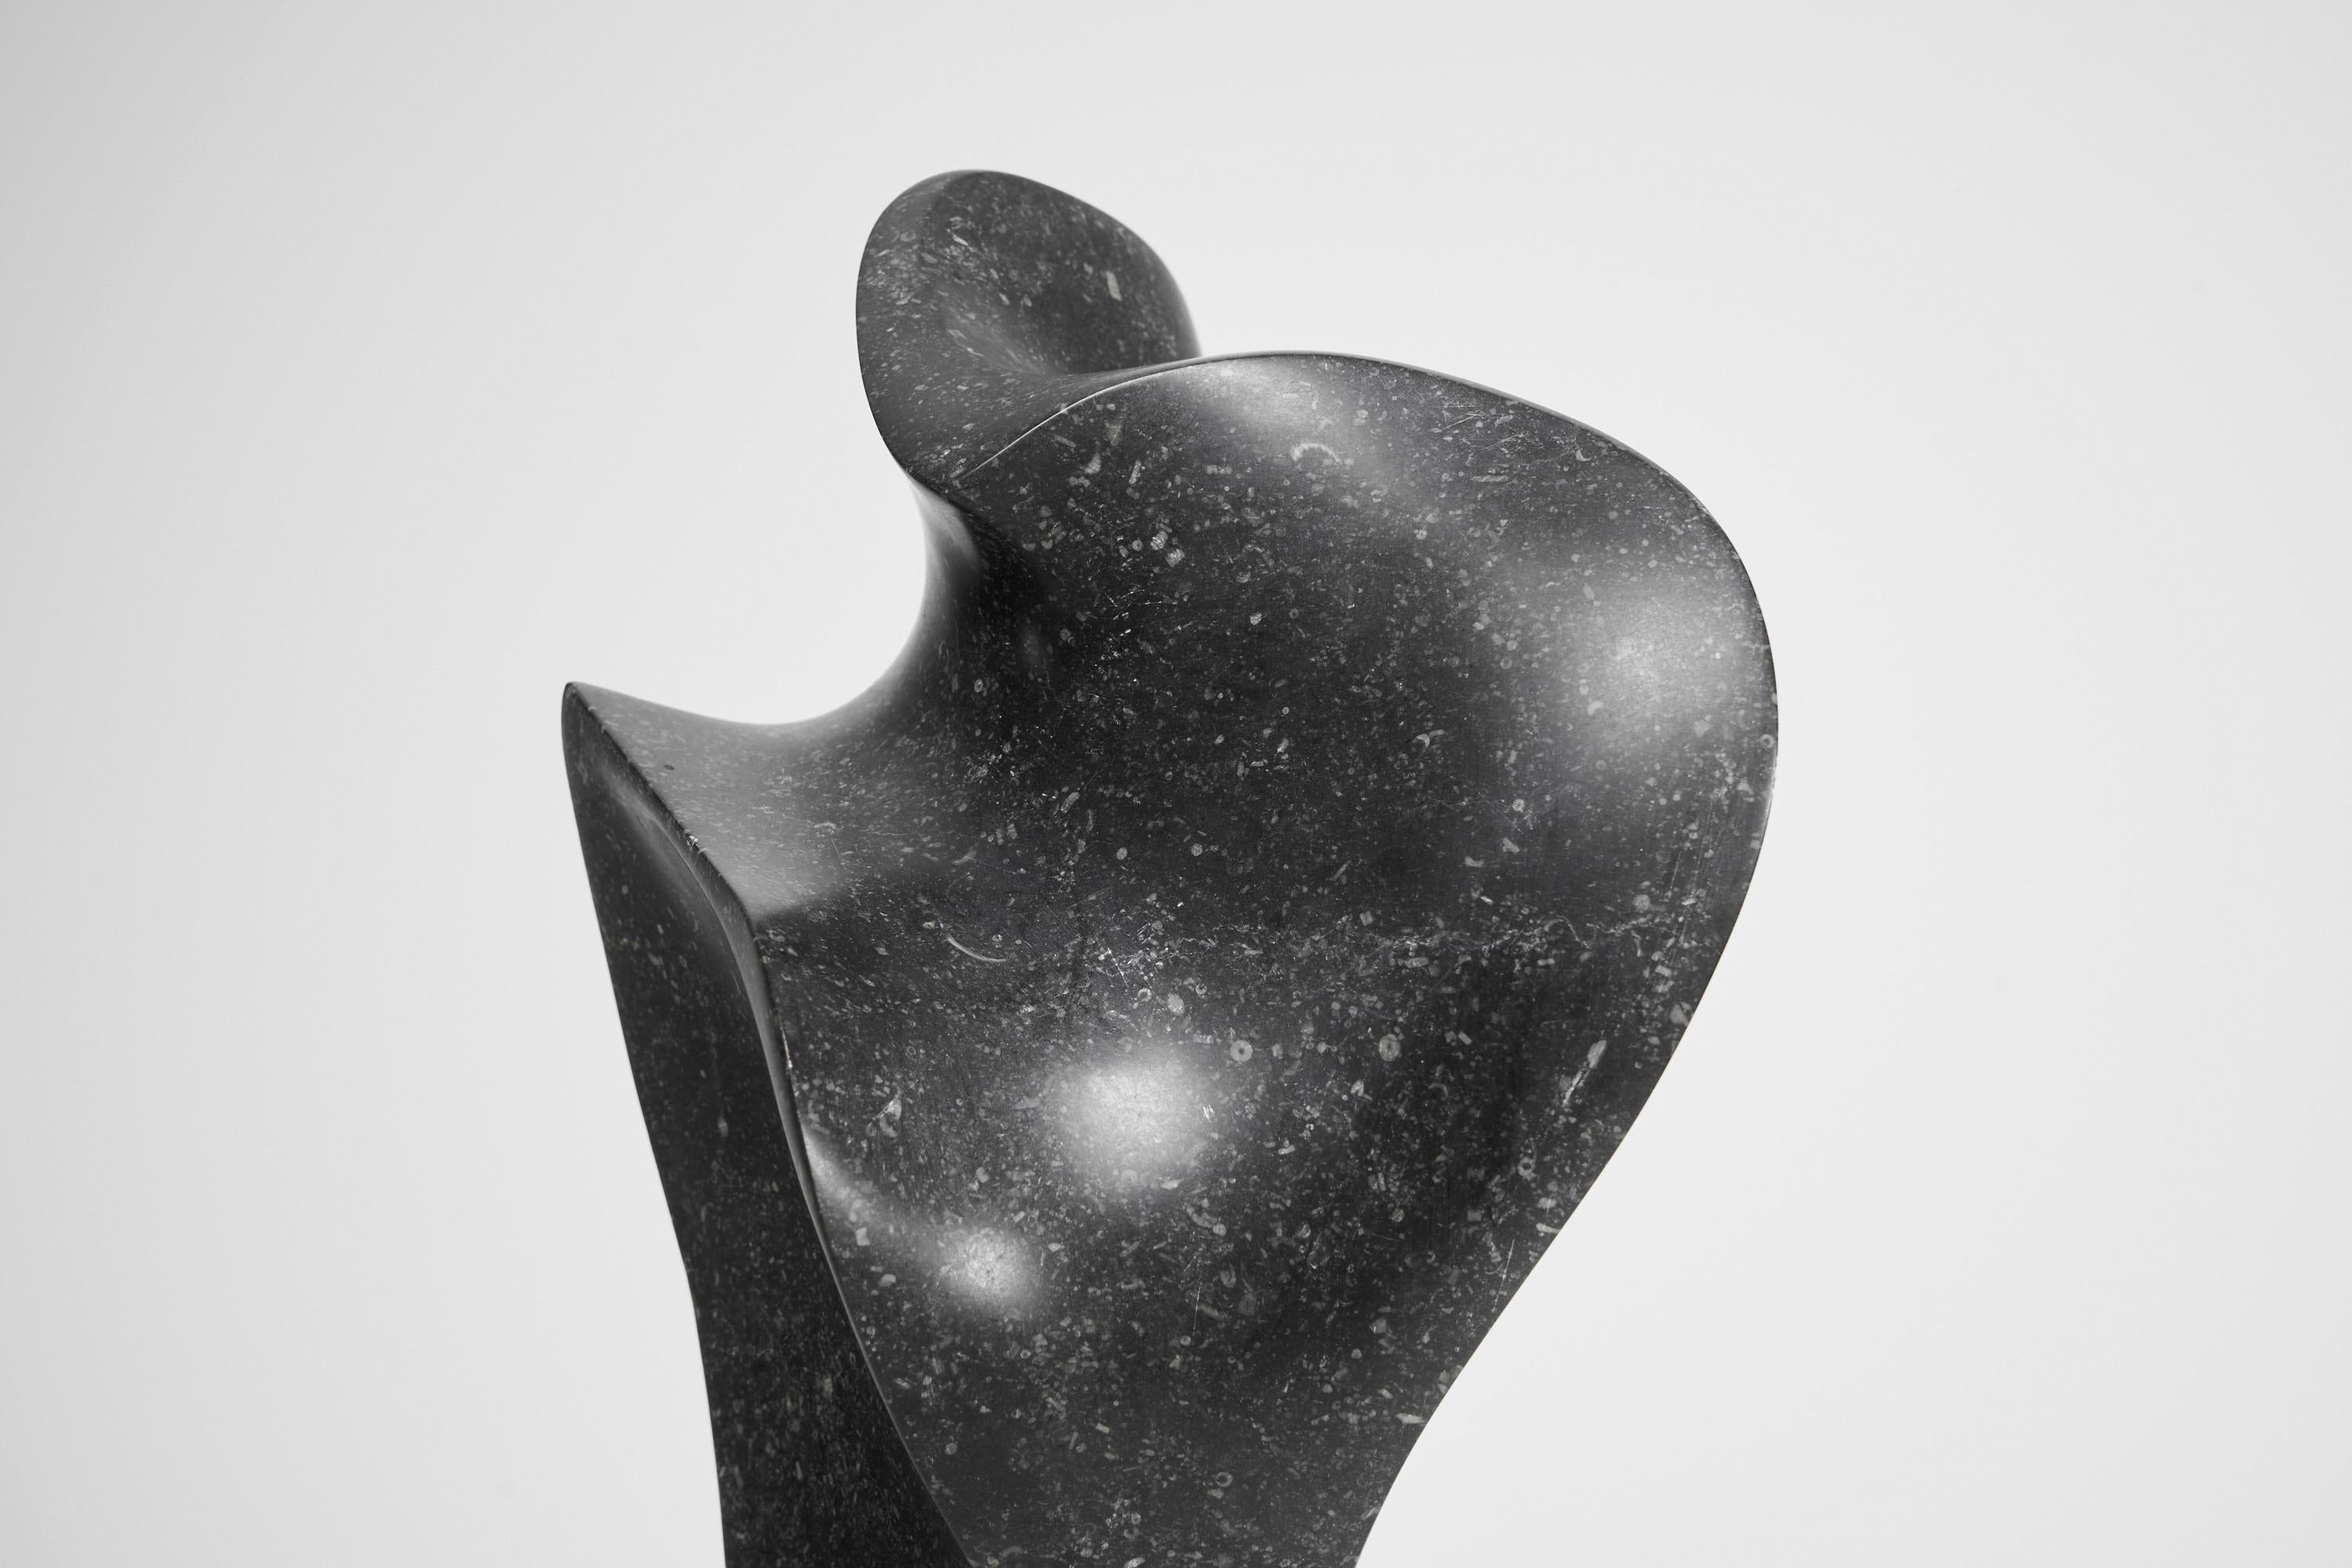 Smooth and very compelling granite sculpture made by visual artist Hein Mader in 1970. This piece is crafted out of a solid piece of granite and rotates on its metal stand. The form is reaching upward and expands doing so, which gives a feel of